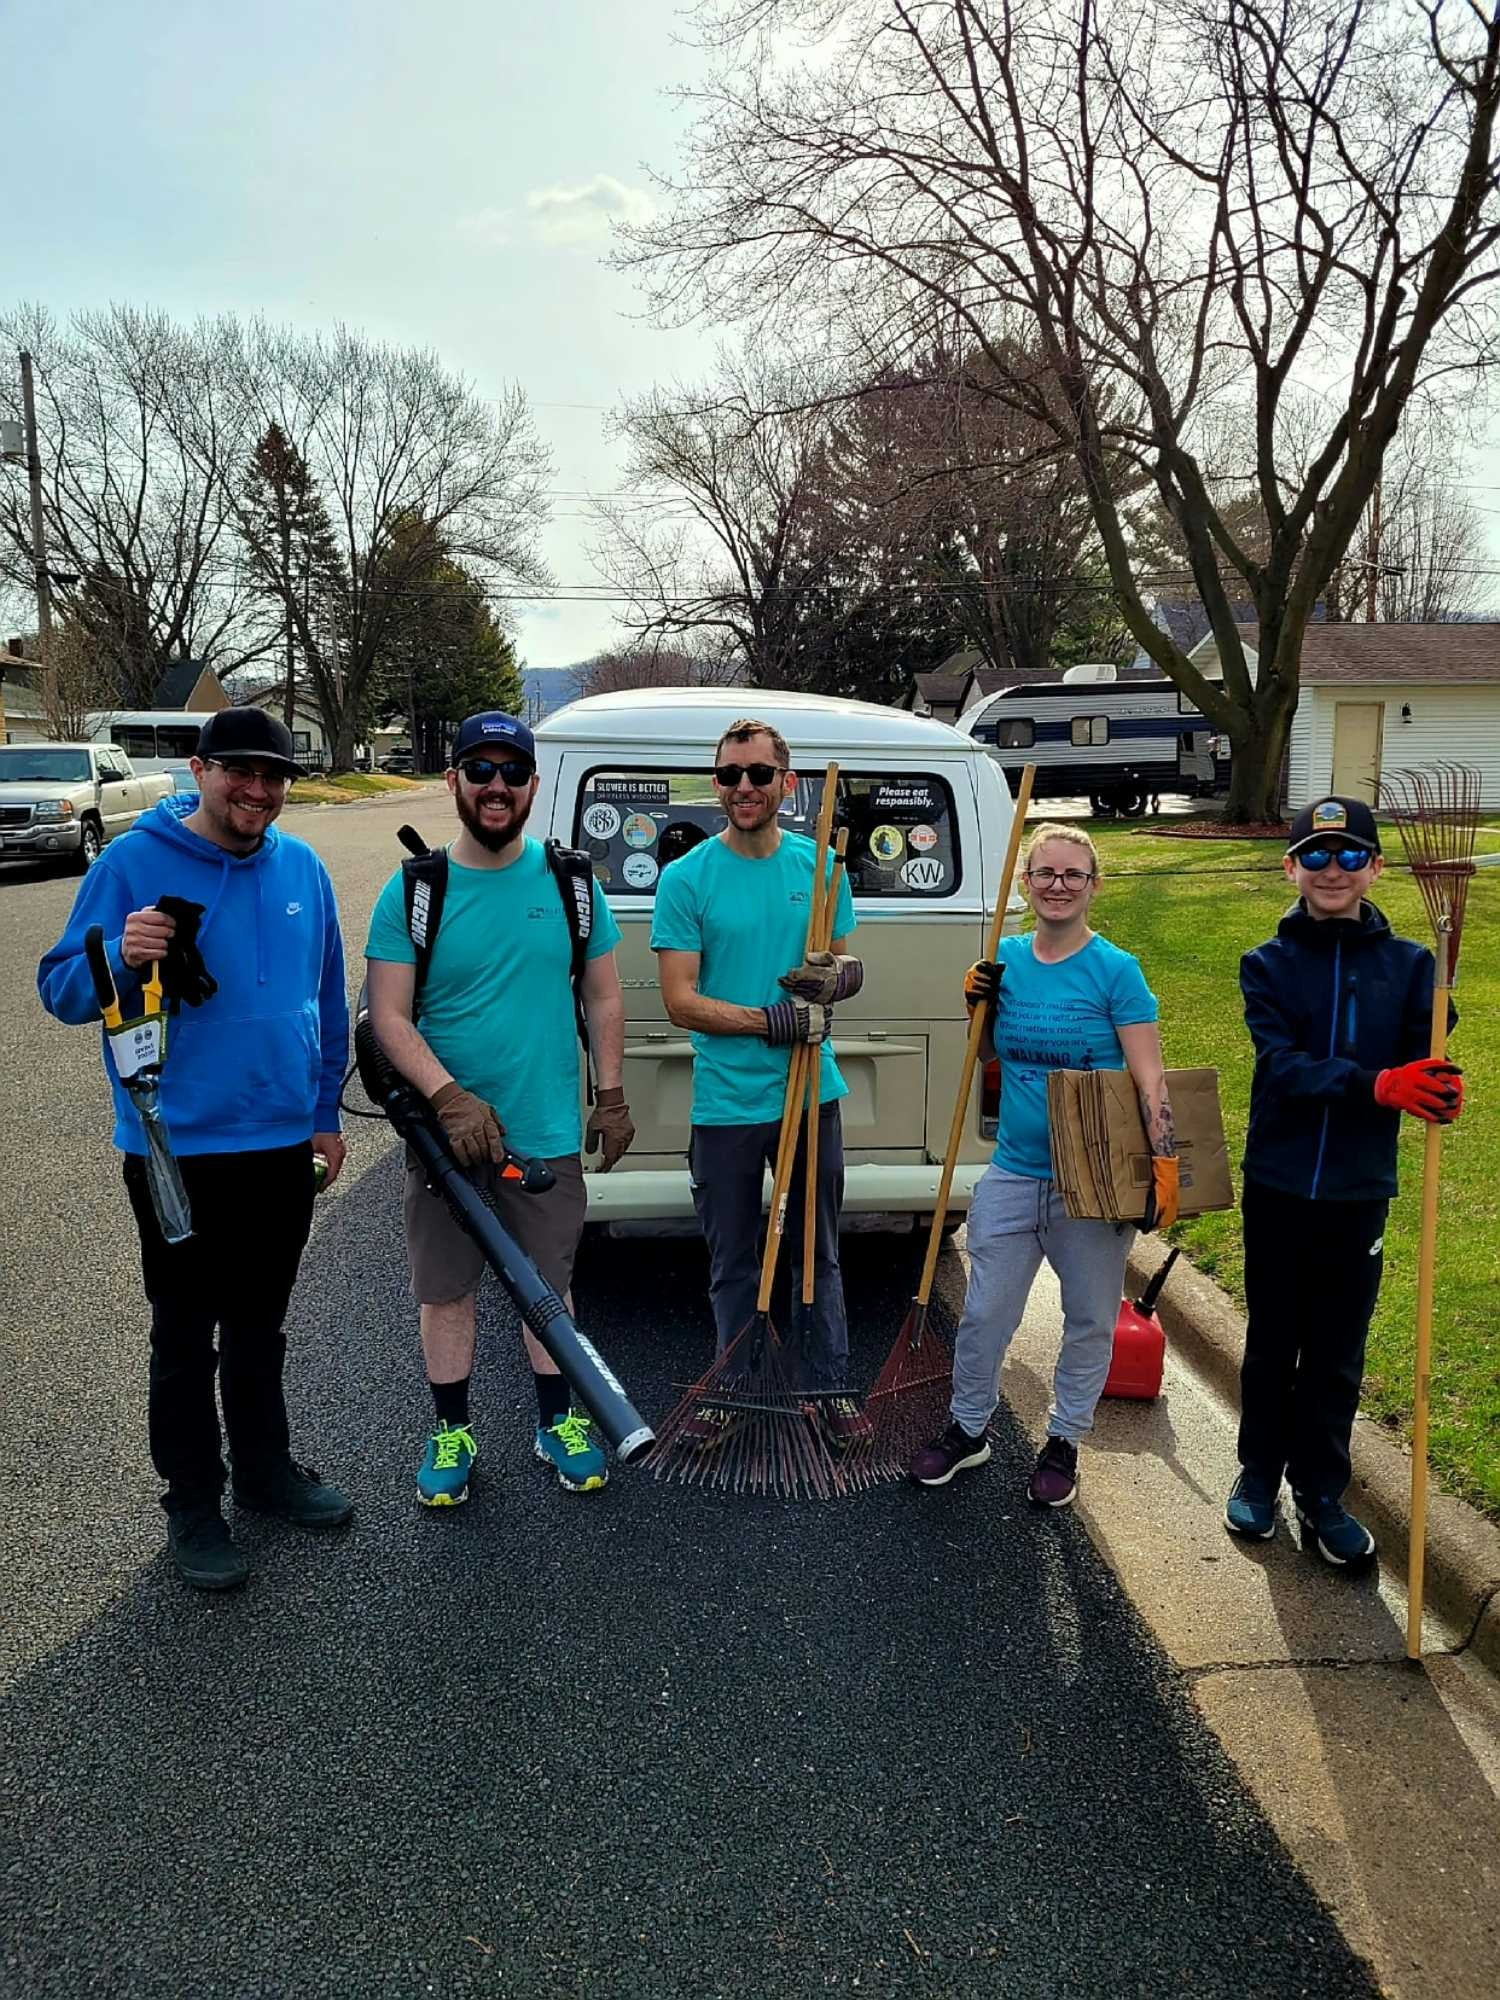 Neighbors day, employees helped 12 elderly or disabled households clean up their yards